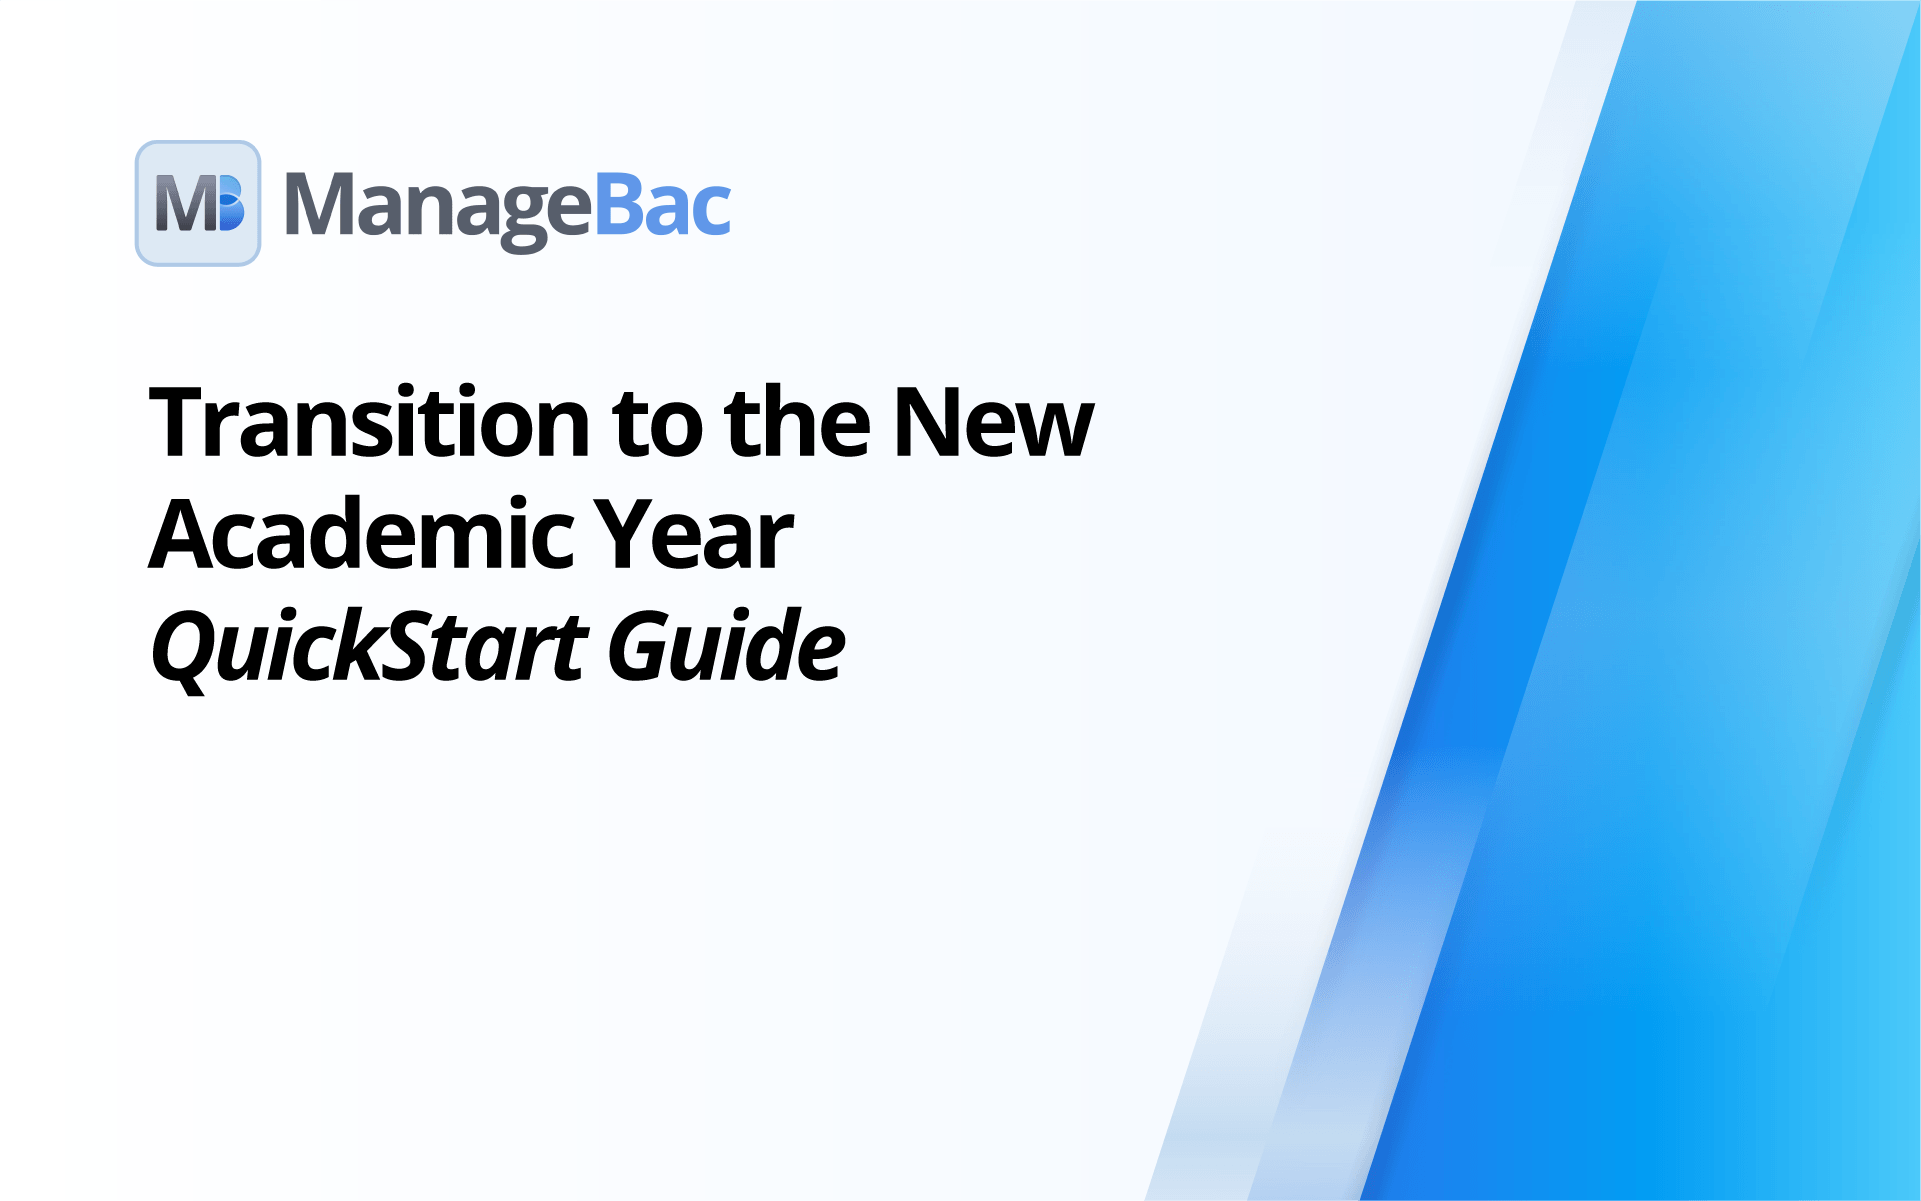 ManageBac QuickStart Guide: Transitioning to the New Academic Year